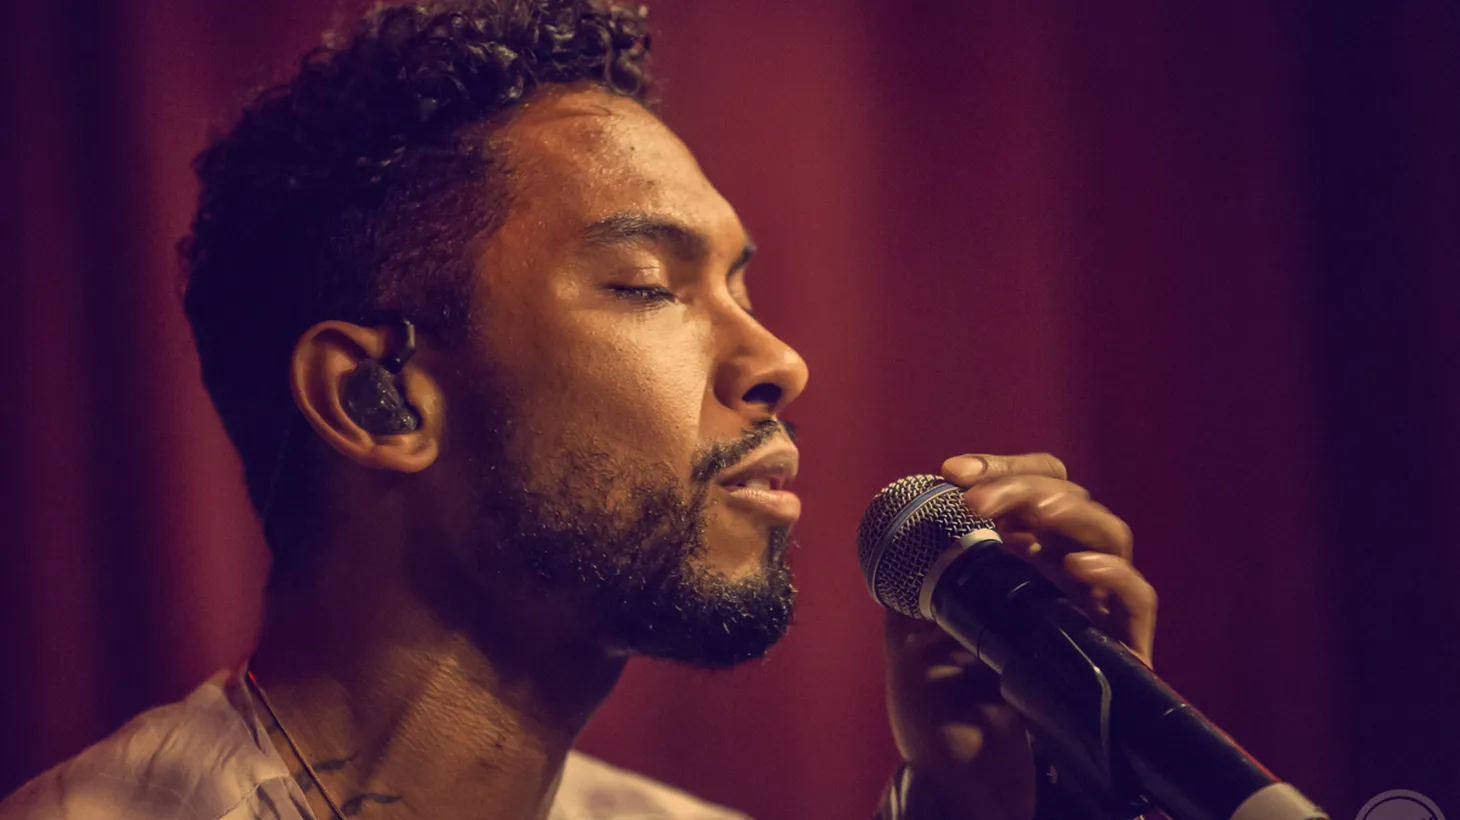 Grammy-nominated singer Miguel hosts the Wildheart Radio Hour, taking us into his world of love and romance in this Valentine's Day special.